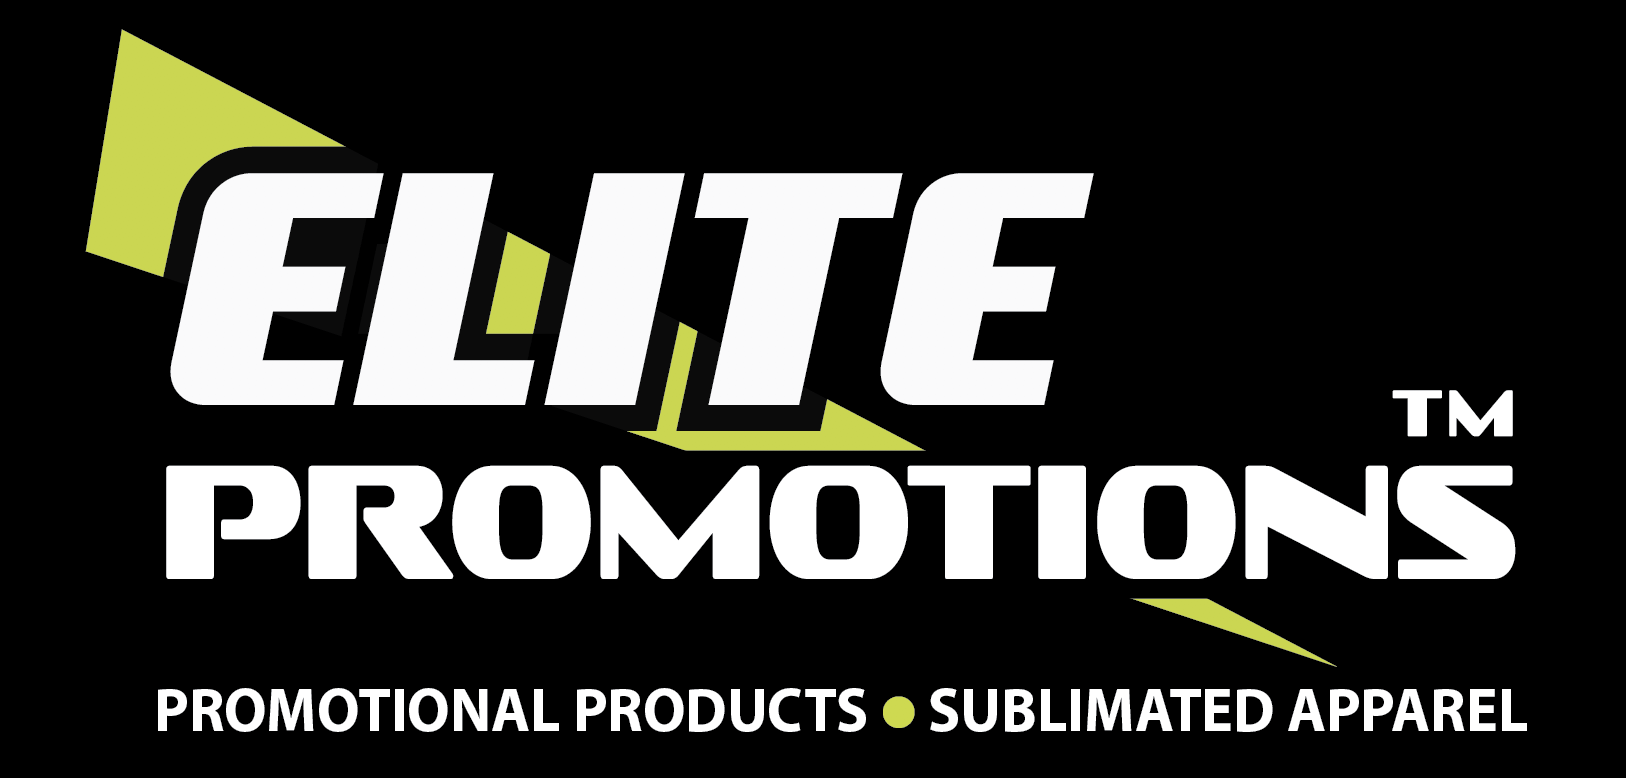 A black and white logo for elite promotions.